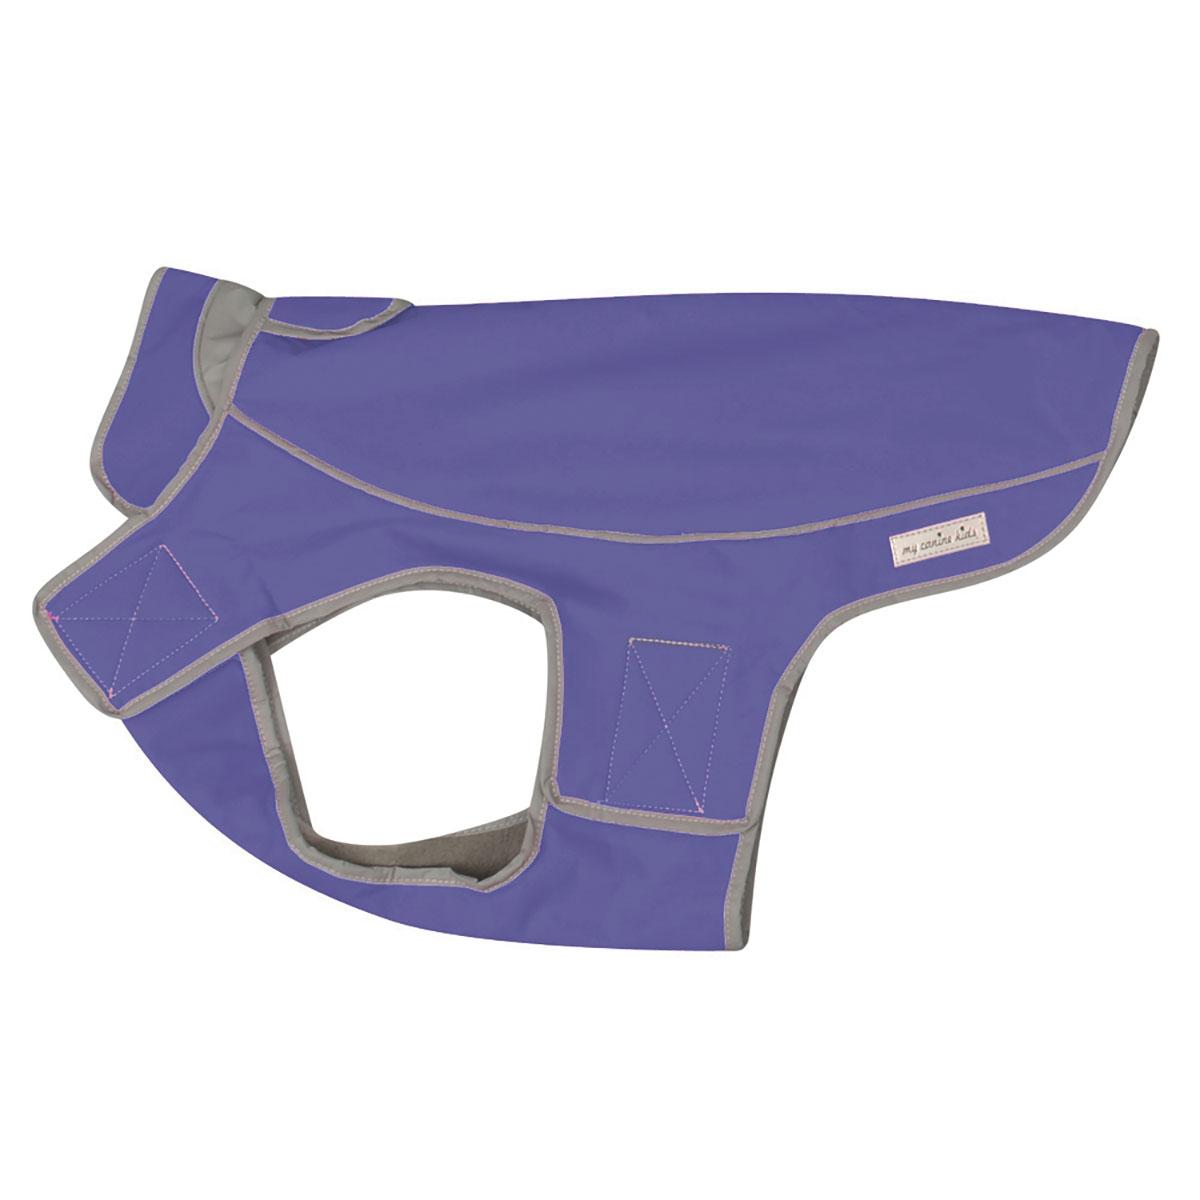 My Canine Kids Precision Fit Dog Parka - Perwinkle 